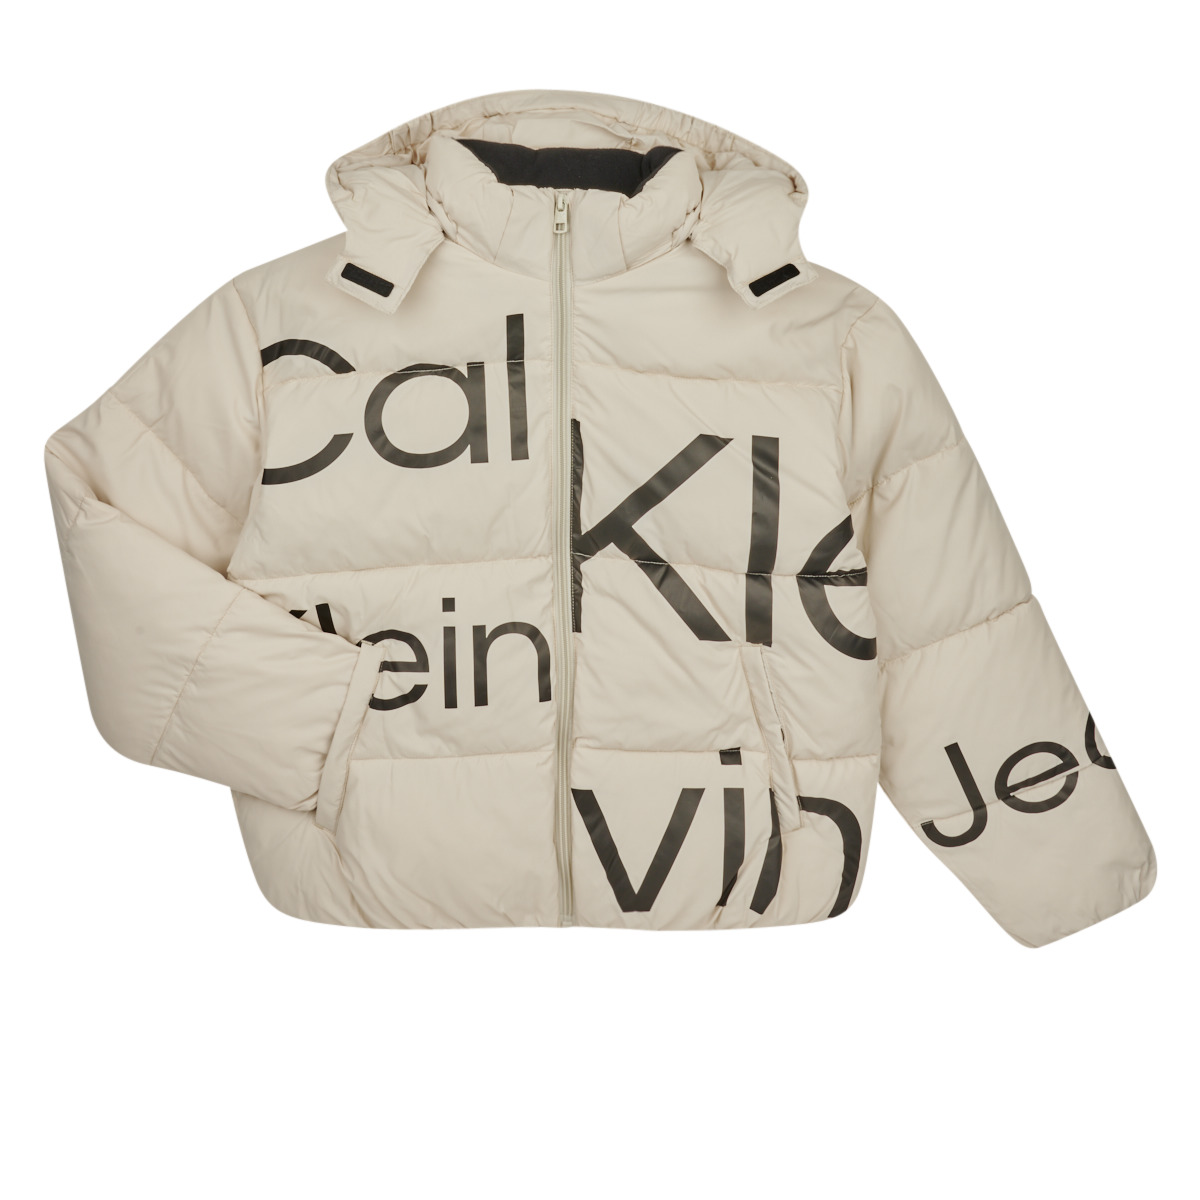 Calvin Klein Jeans BOLD INSTITUTIONAL - 176,00 coats White LOGO PUFFER Spartoo Europe ! JACKET | Fast - Child € Duffel delivery Clothing